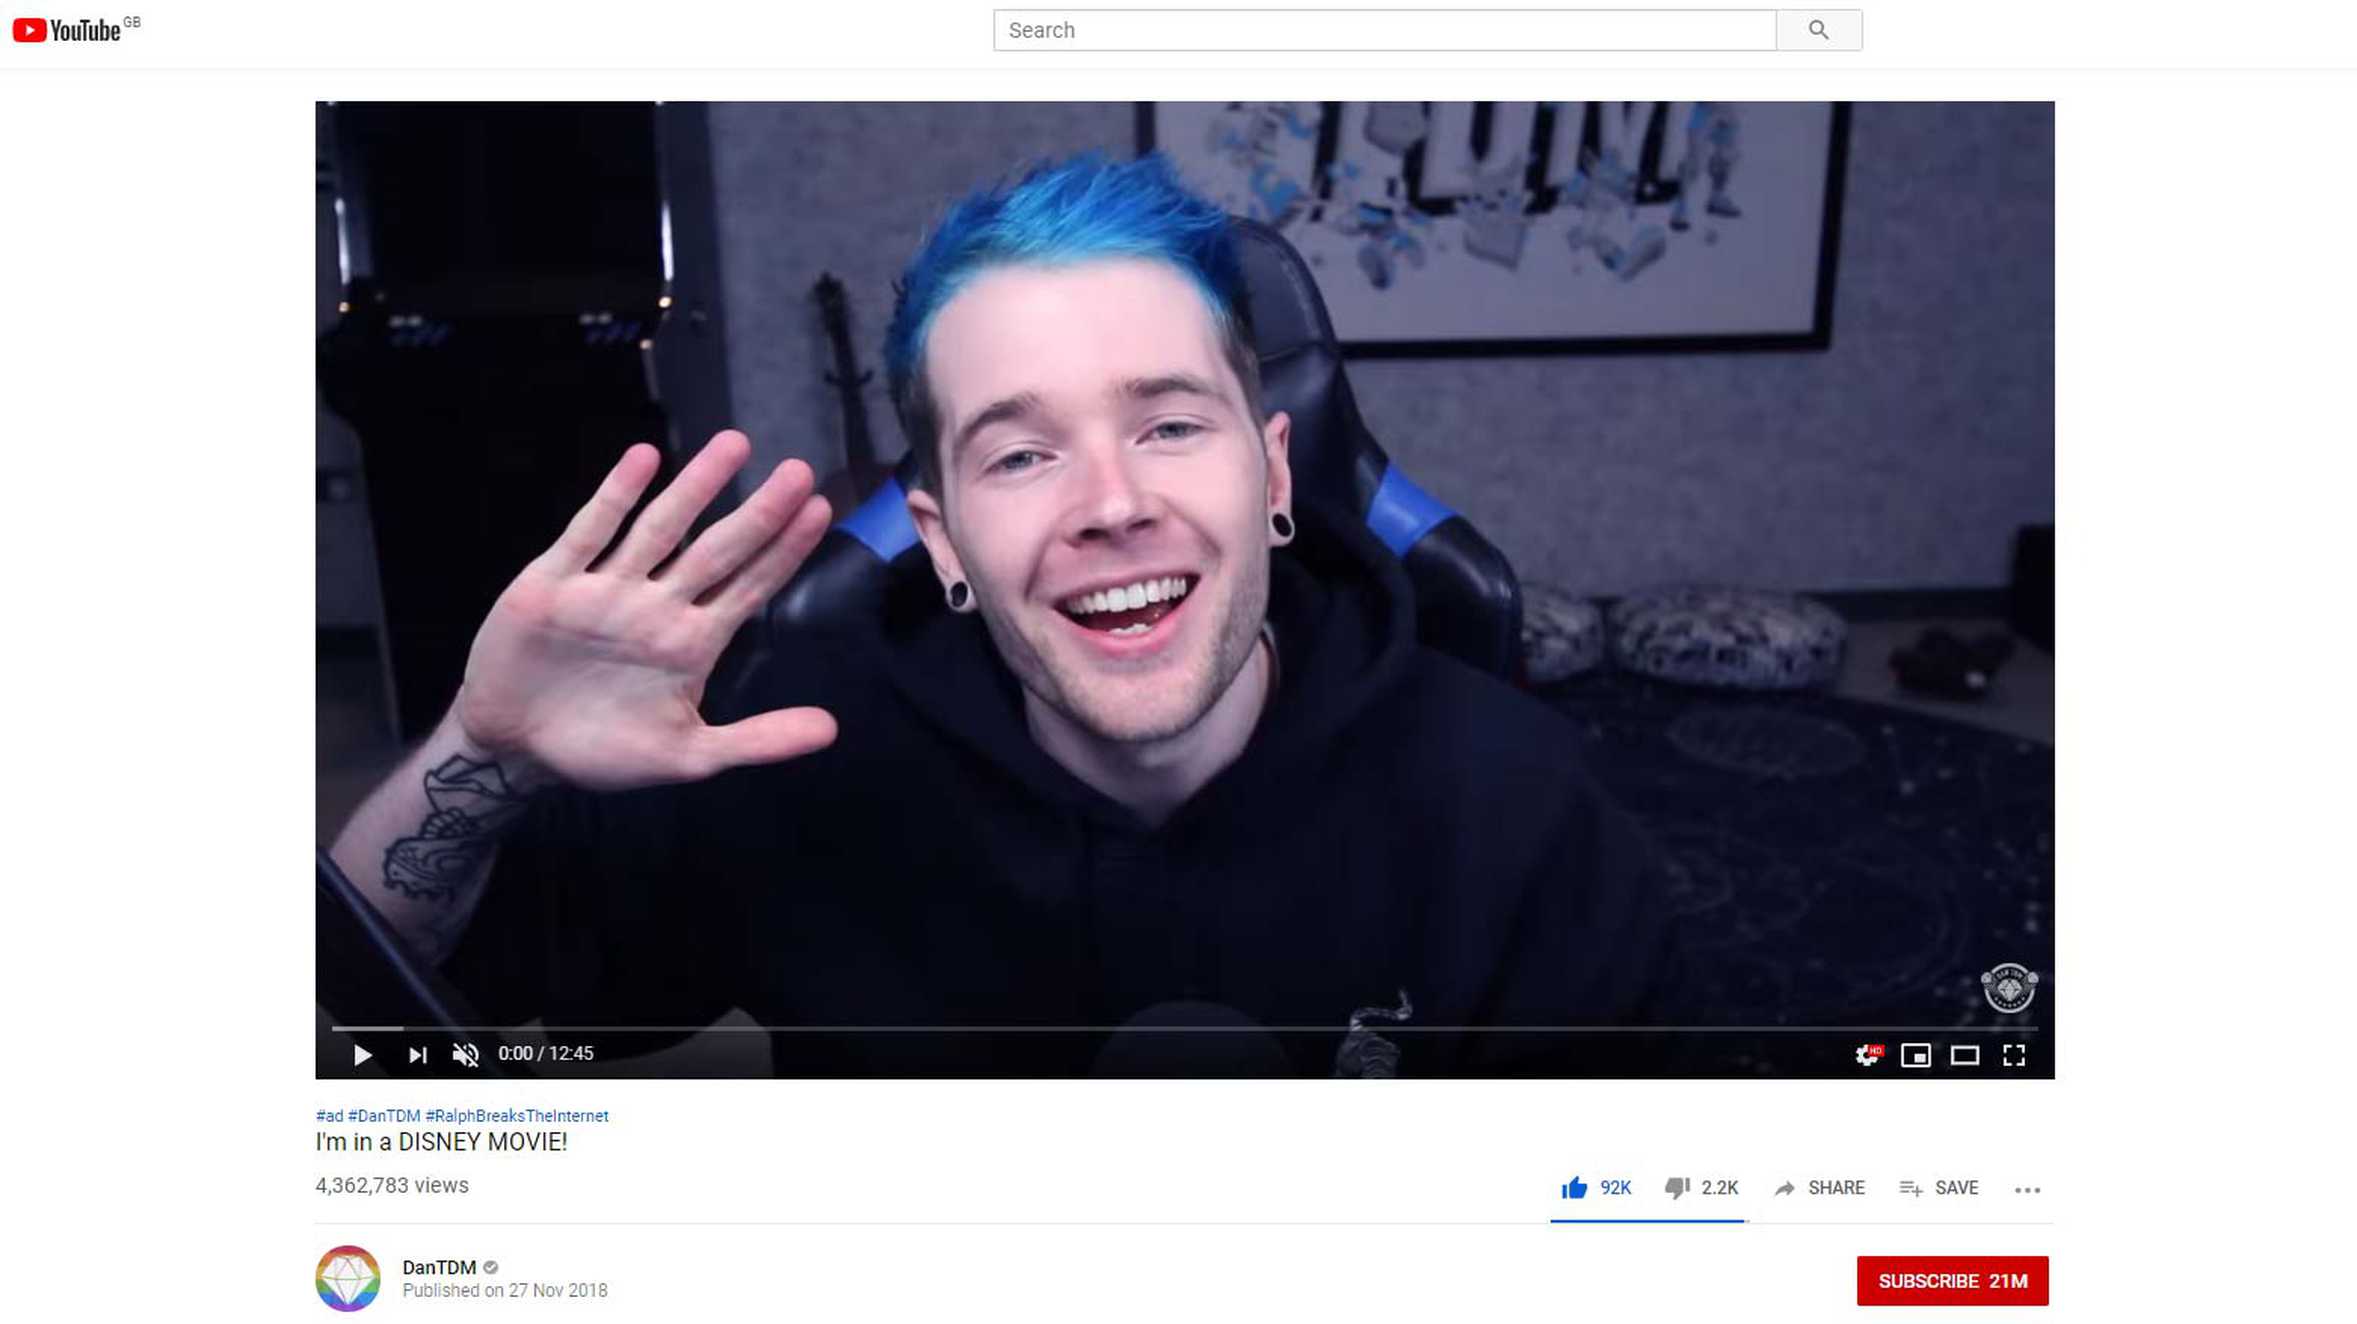 YouTube influencer DanTDM announcing his part in Ralph Breaks the Internet